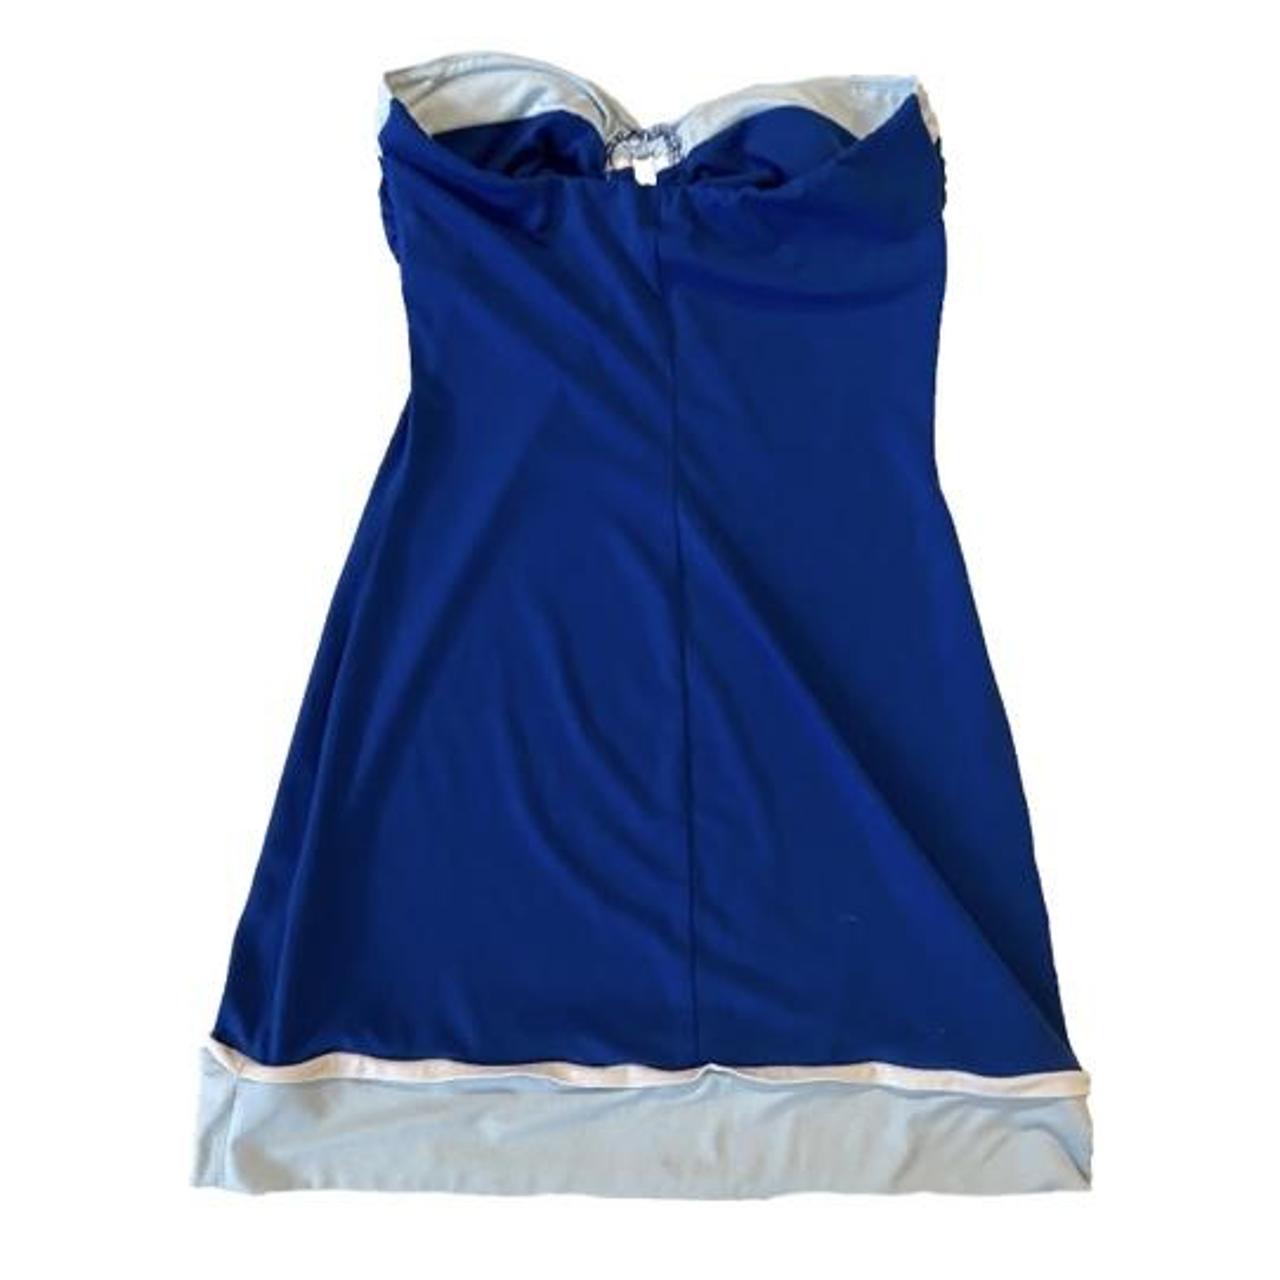 Frederick's of Hollywood Women's Blue Dress (2)